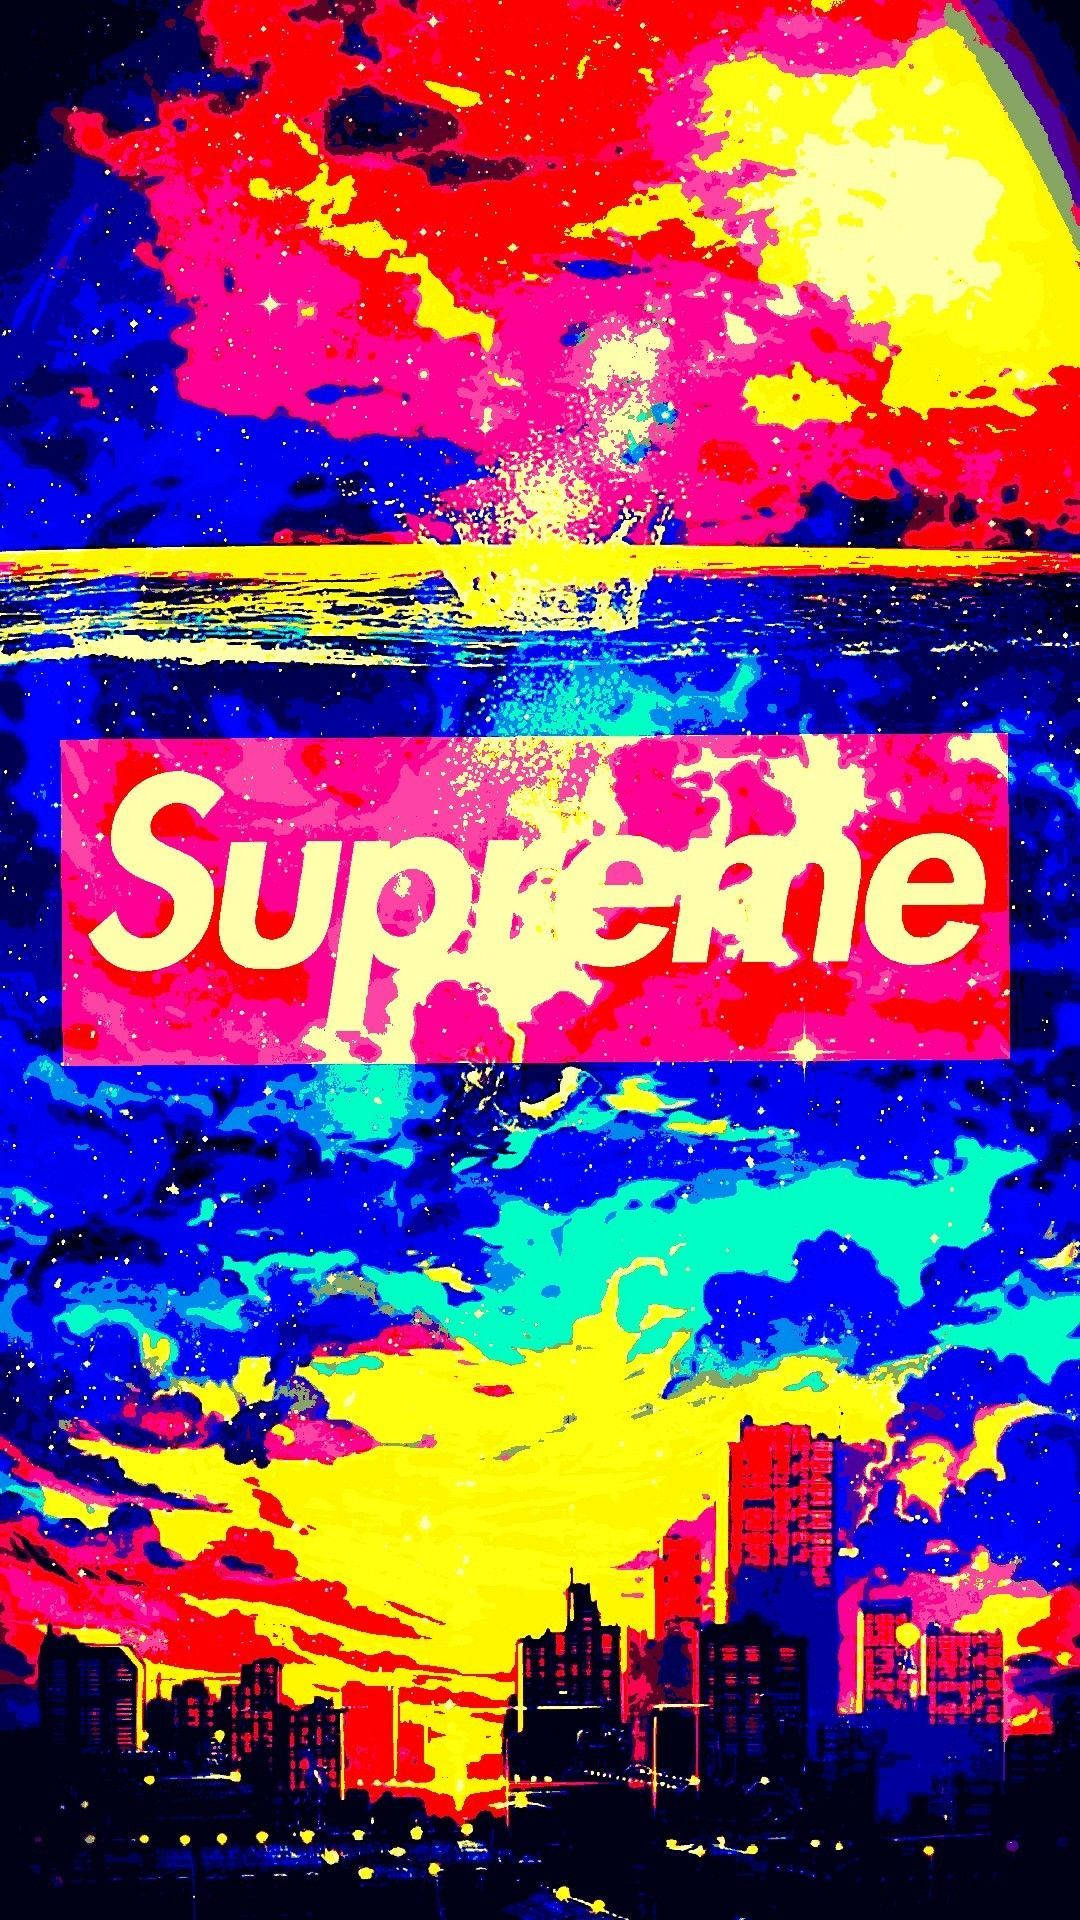 Supreme 1080X1920 Wallpaper and Background Image